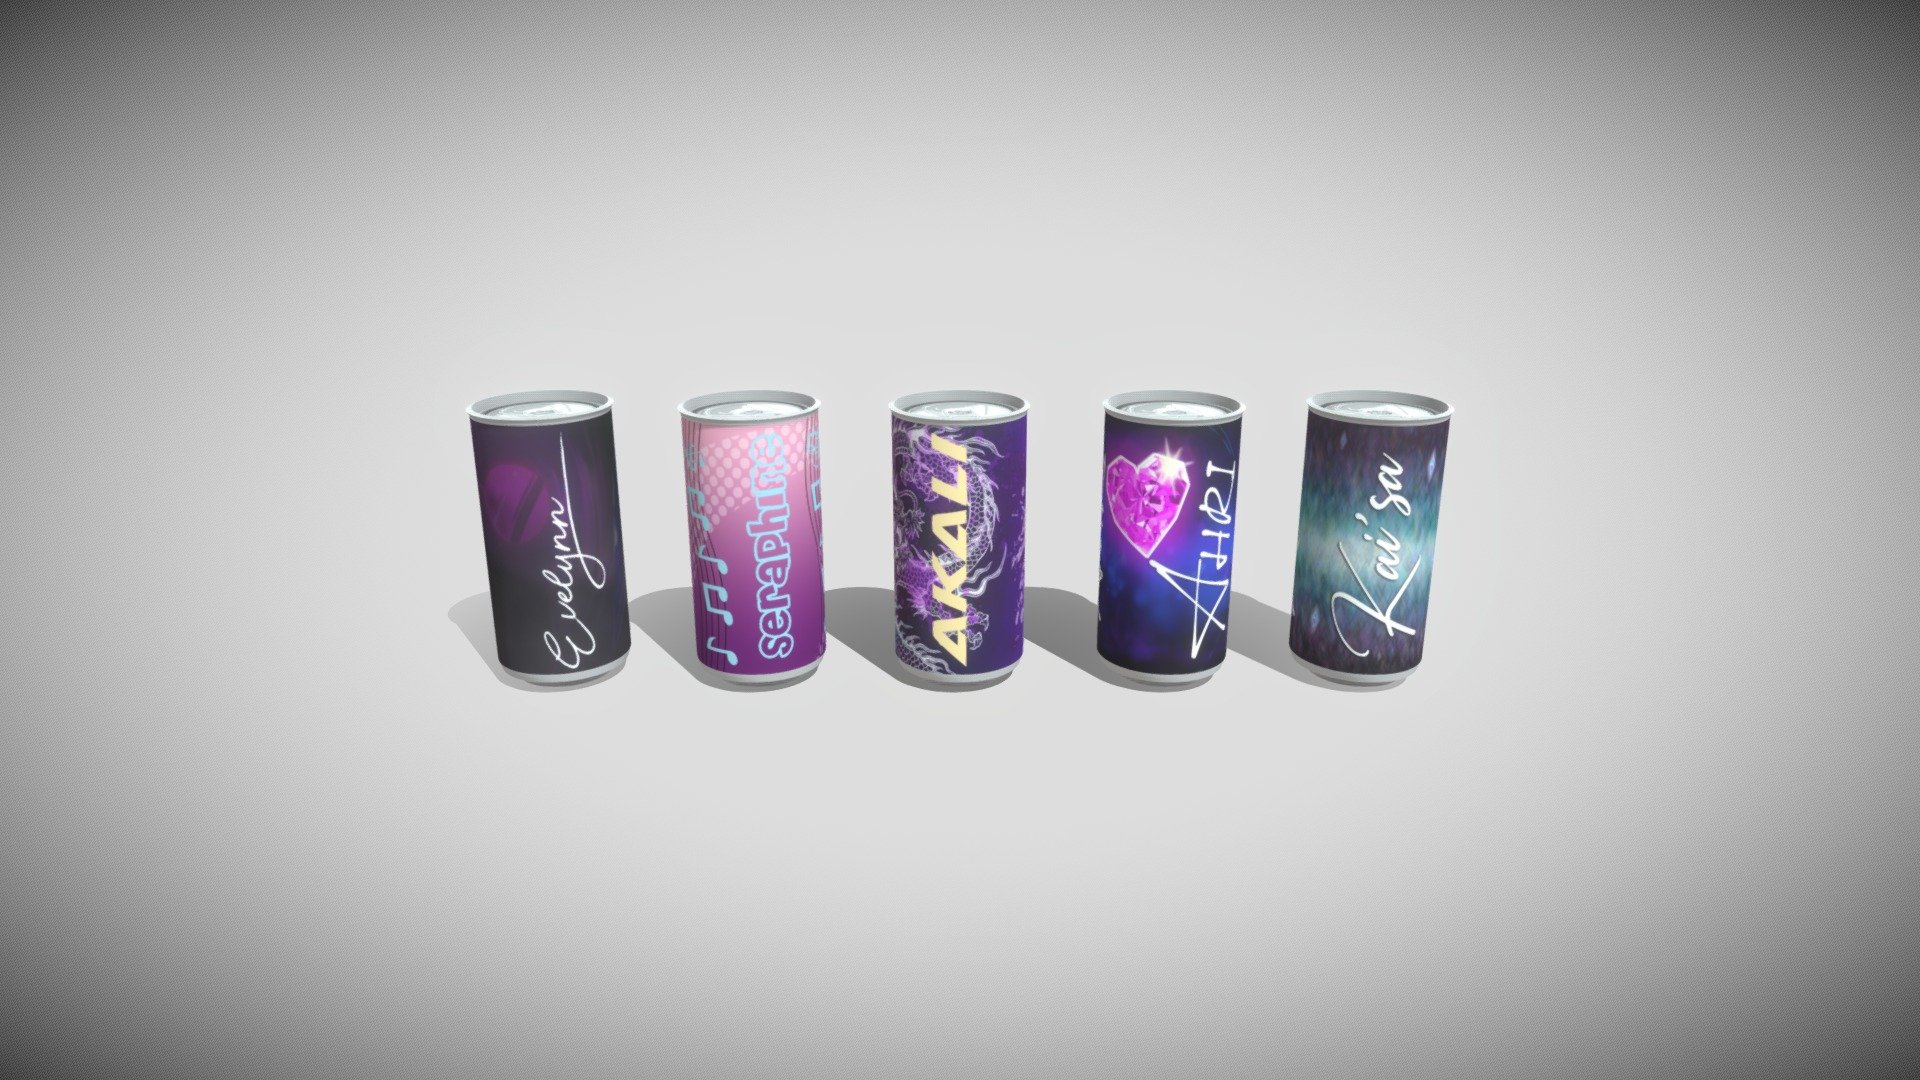 The soda cans were made based on the original formation of the K/DA of the game legue of legends.
A bonus there is also the seraphine soda can, which until the moment of this upload has not been launched 3d model